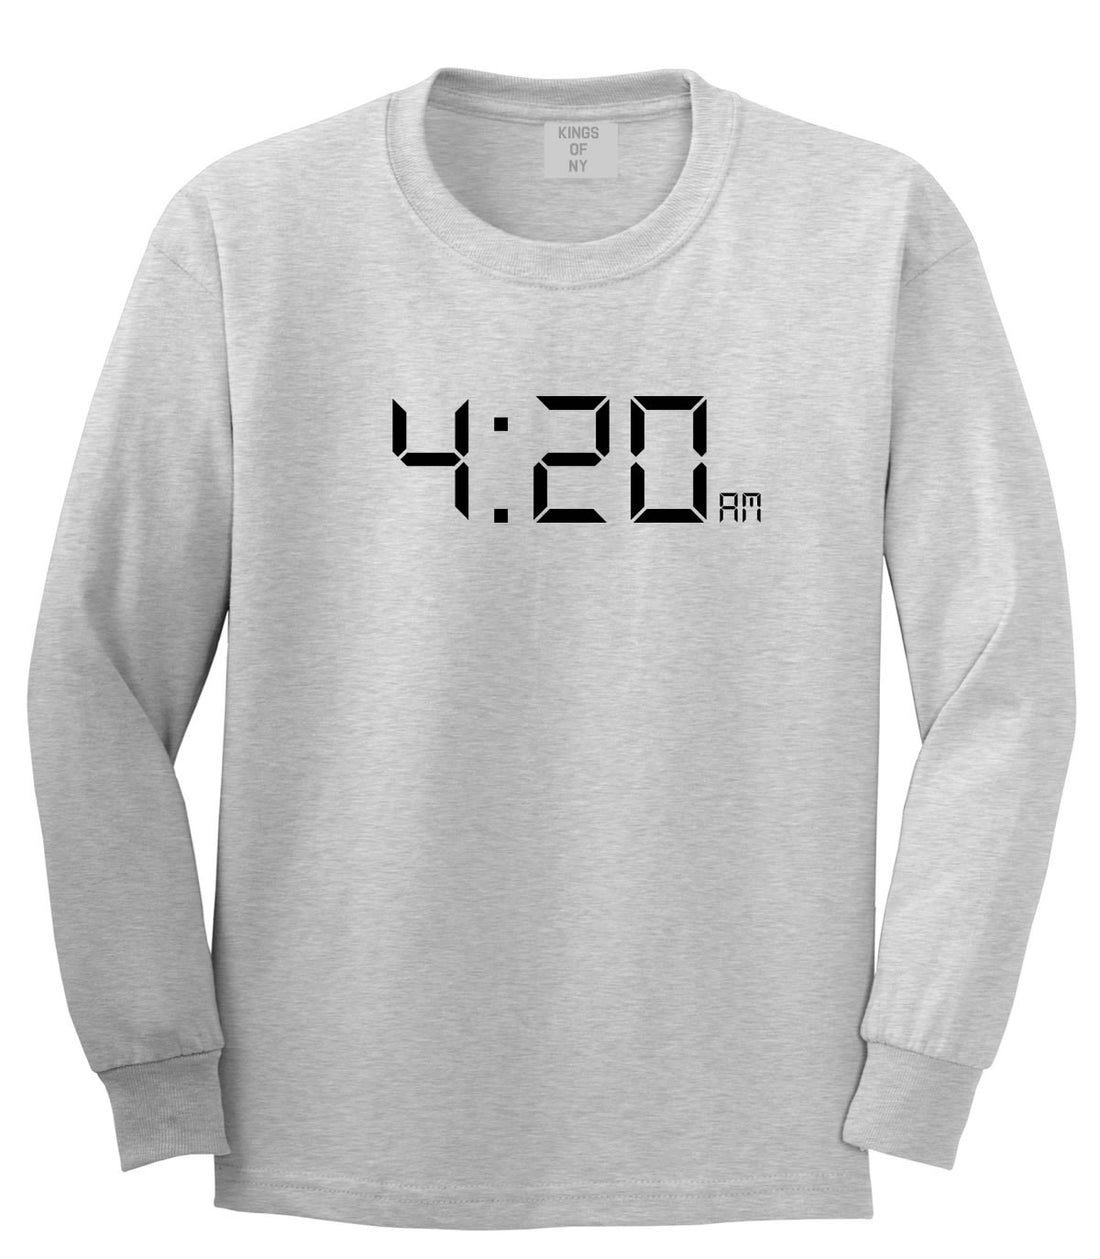 420 Time Weed Somker Long Sleeve T-Shirt in Grey By Kings Of NY